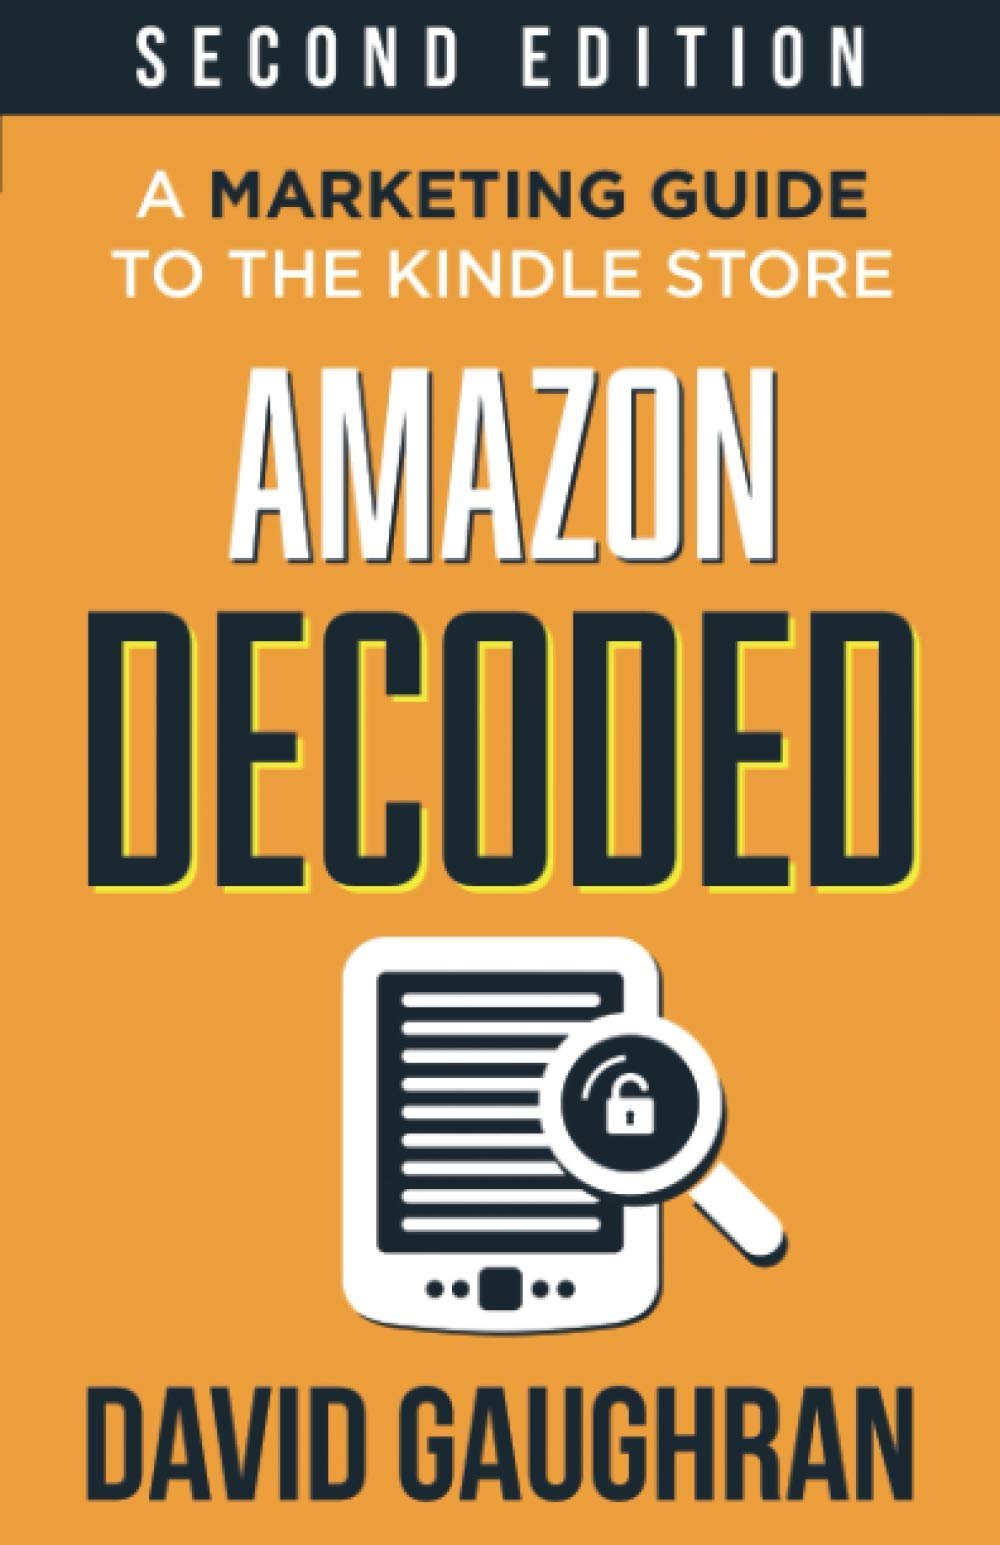 Amazon Decoded: A Marketing Guide to the Kindle Store by David Gaughran